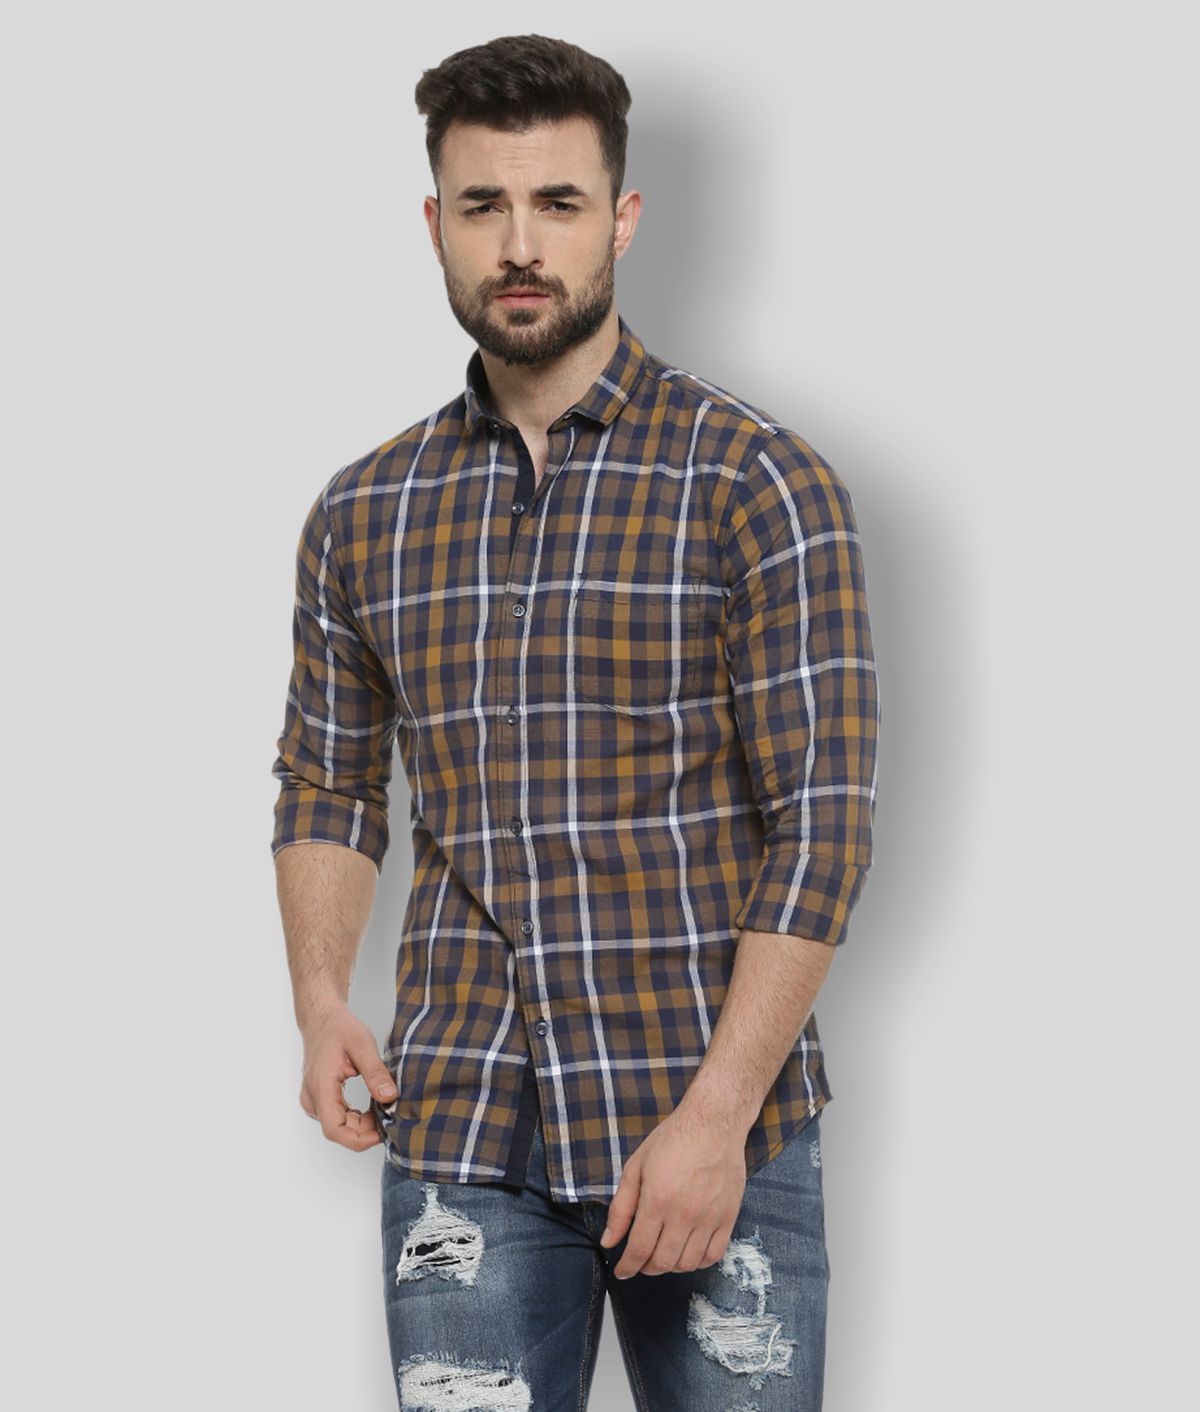     			Campus Sutra - Brown Cotton Regular Fit Men's Casual Shirt (Pack of 1 )